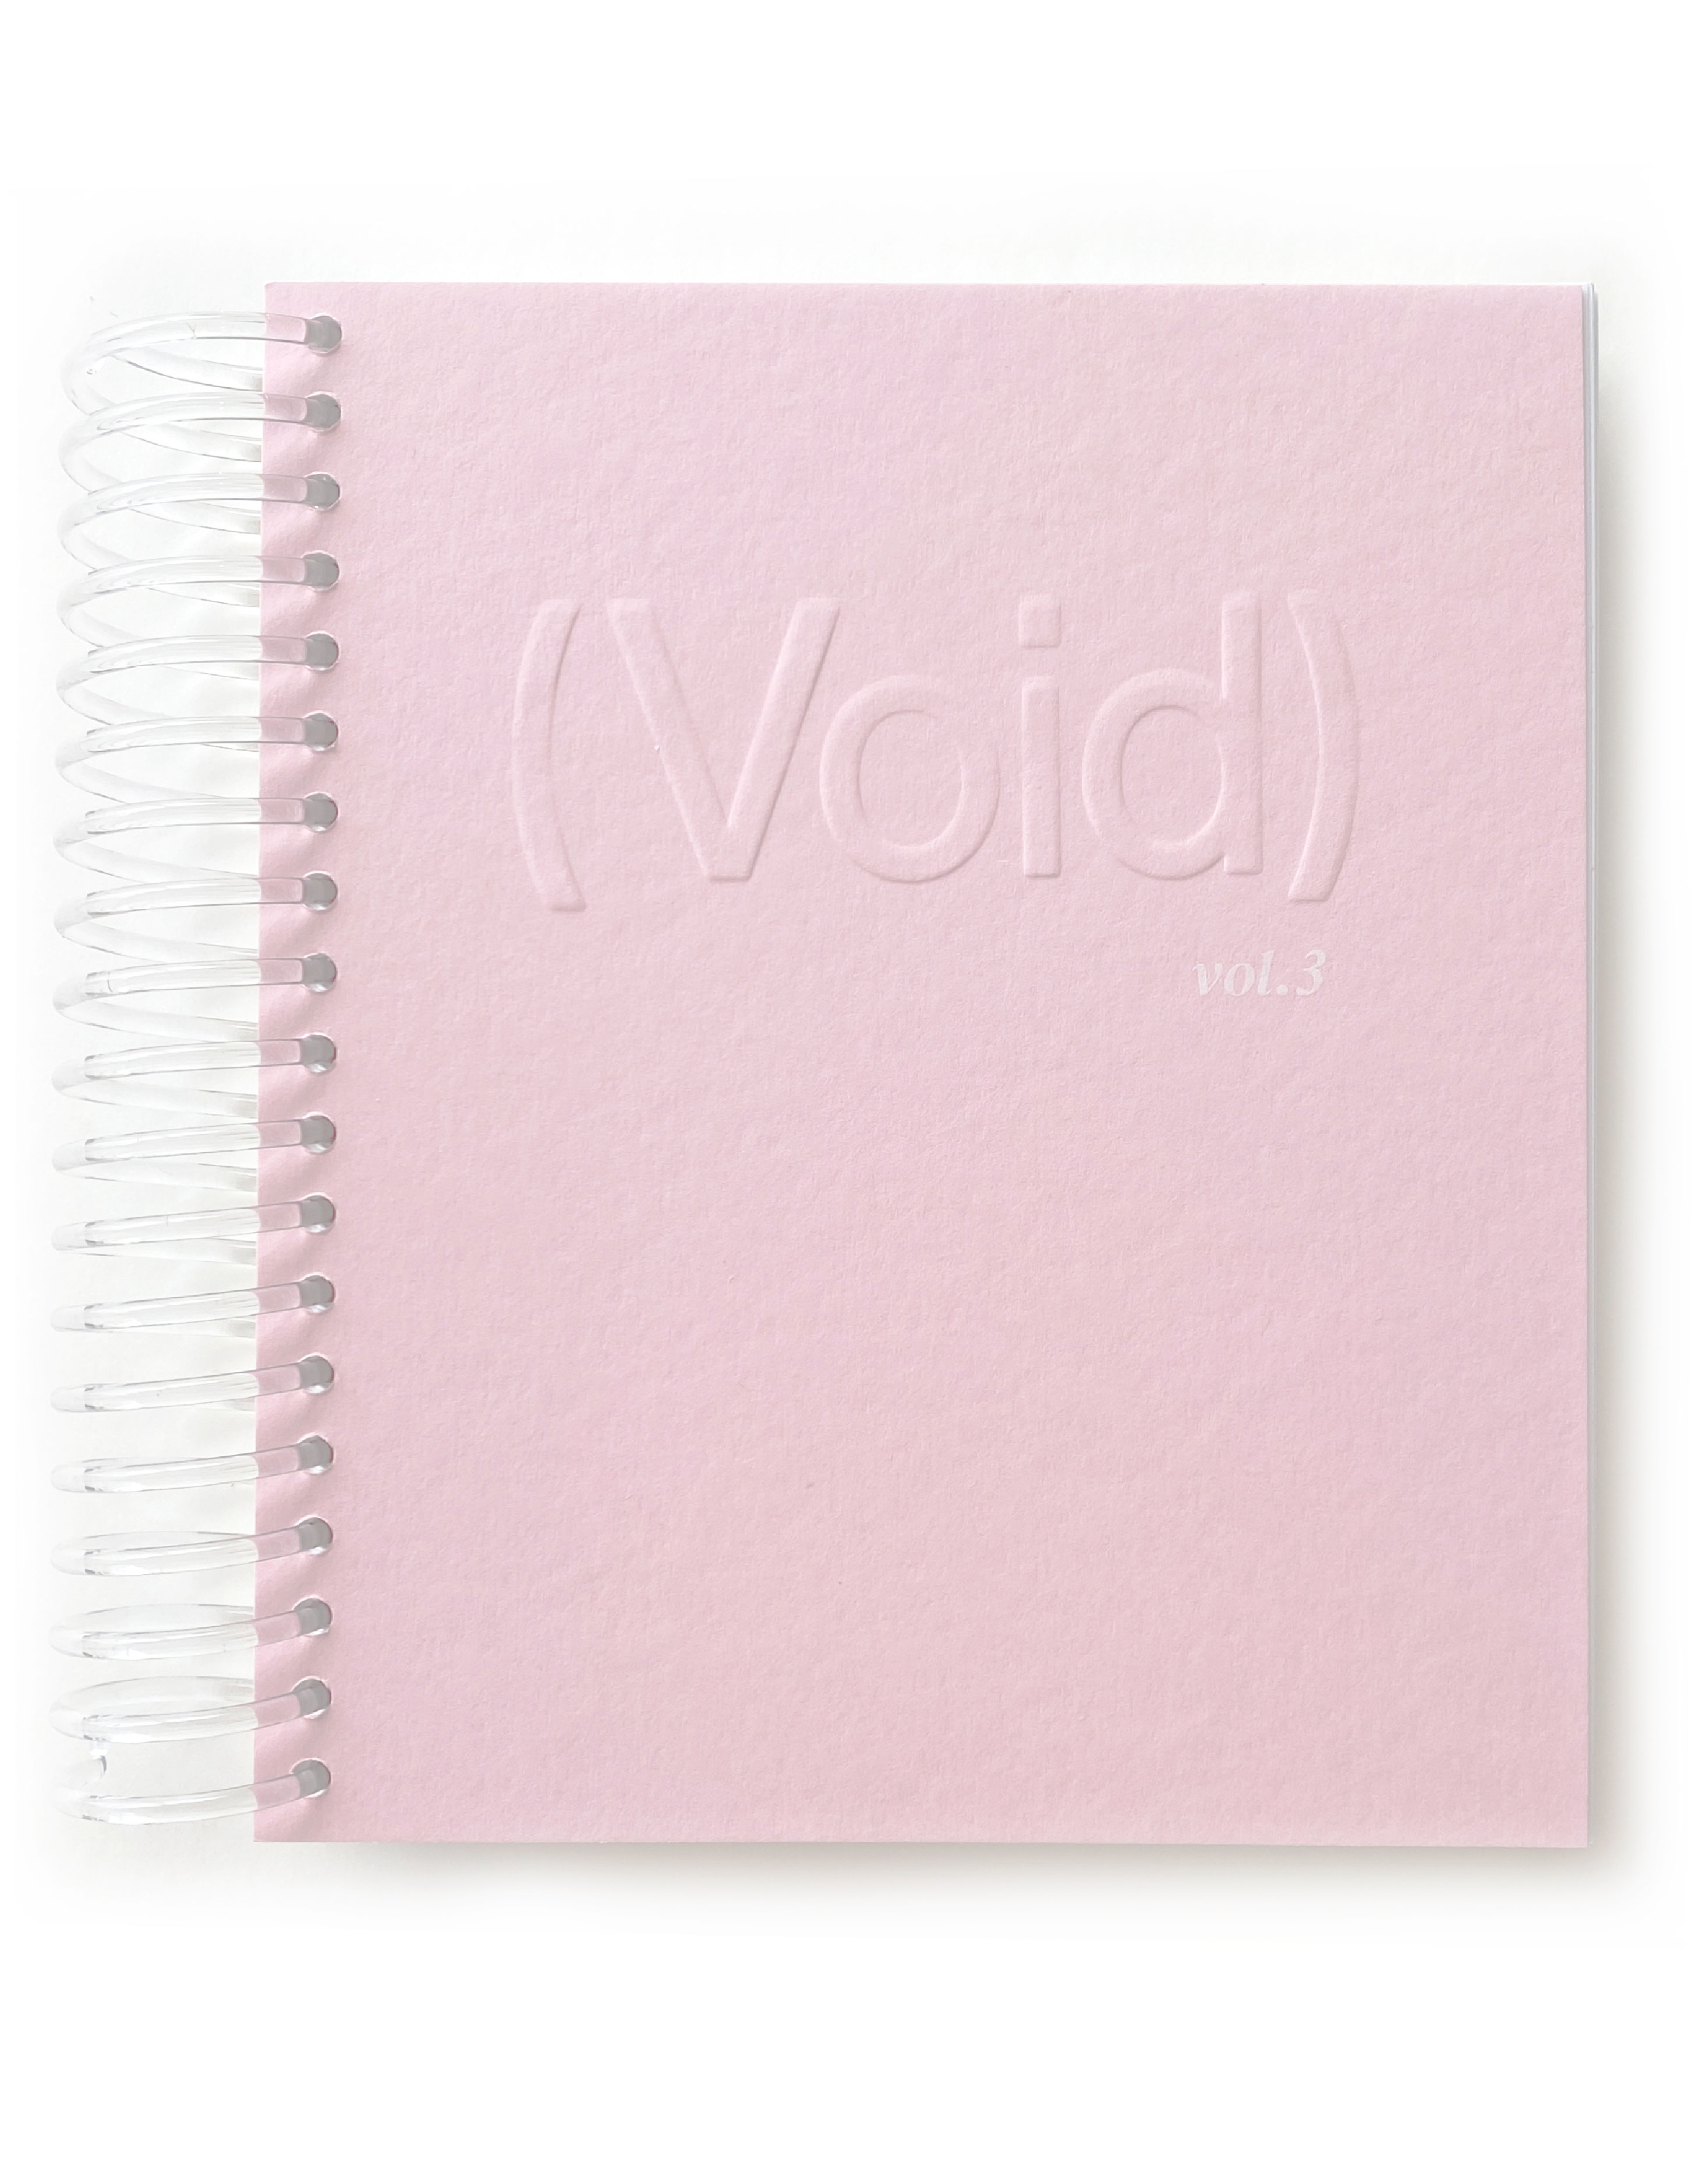 VOID NOTEBOOK (VOL.3) *Crystal Ring